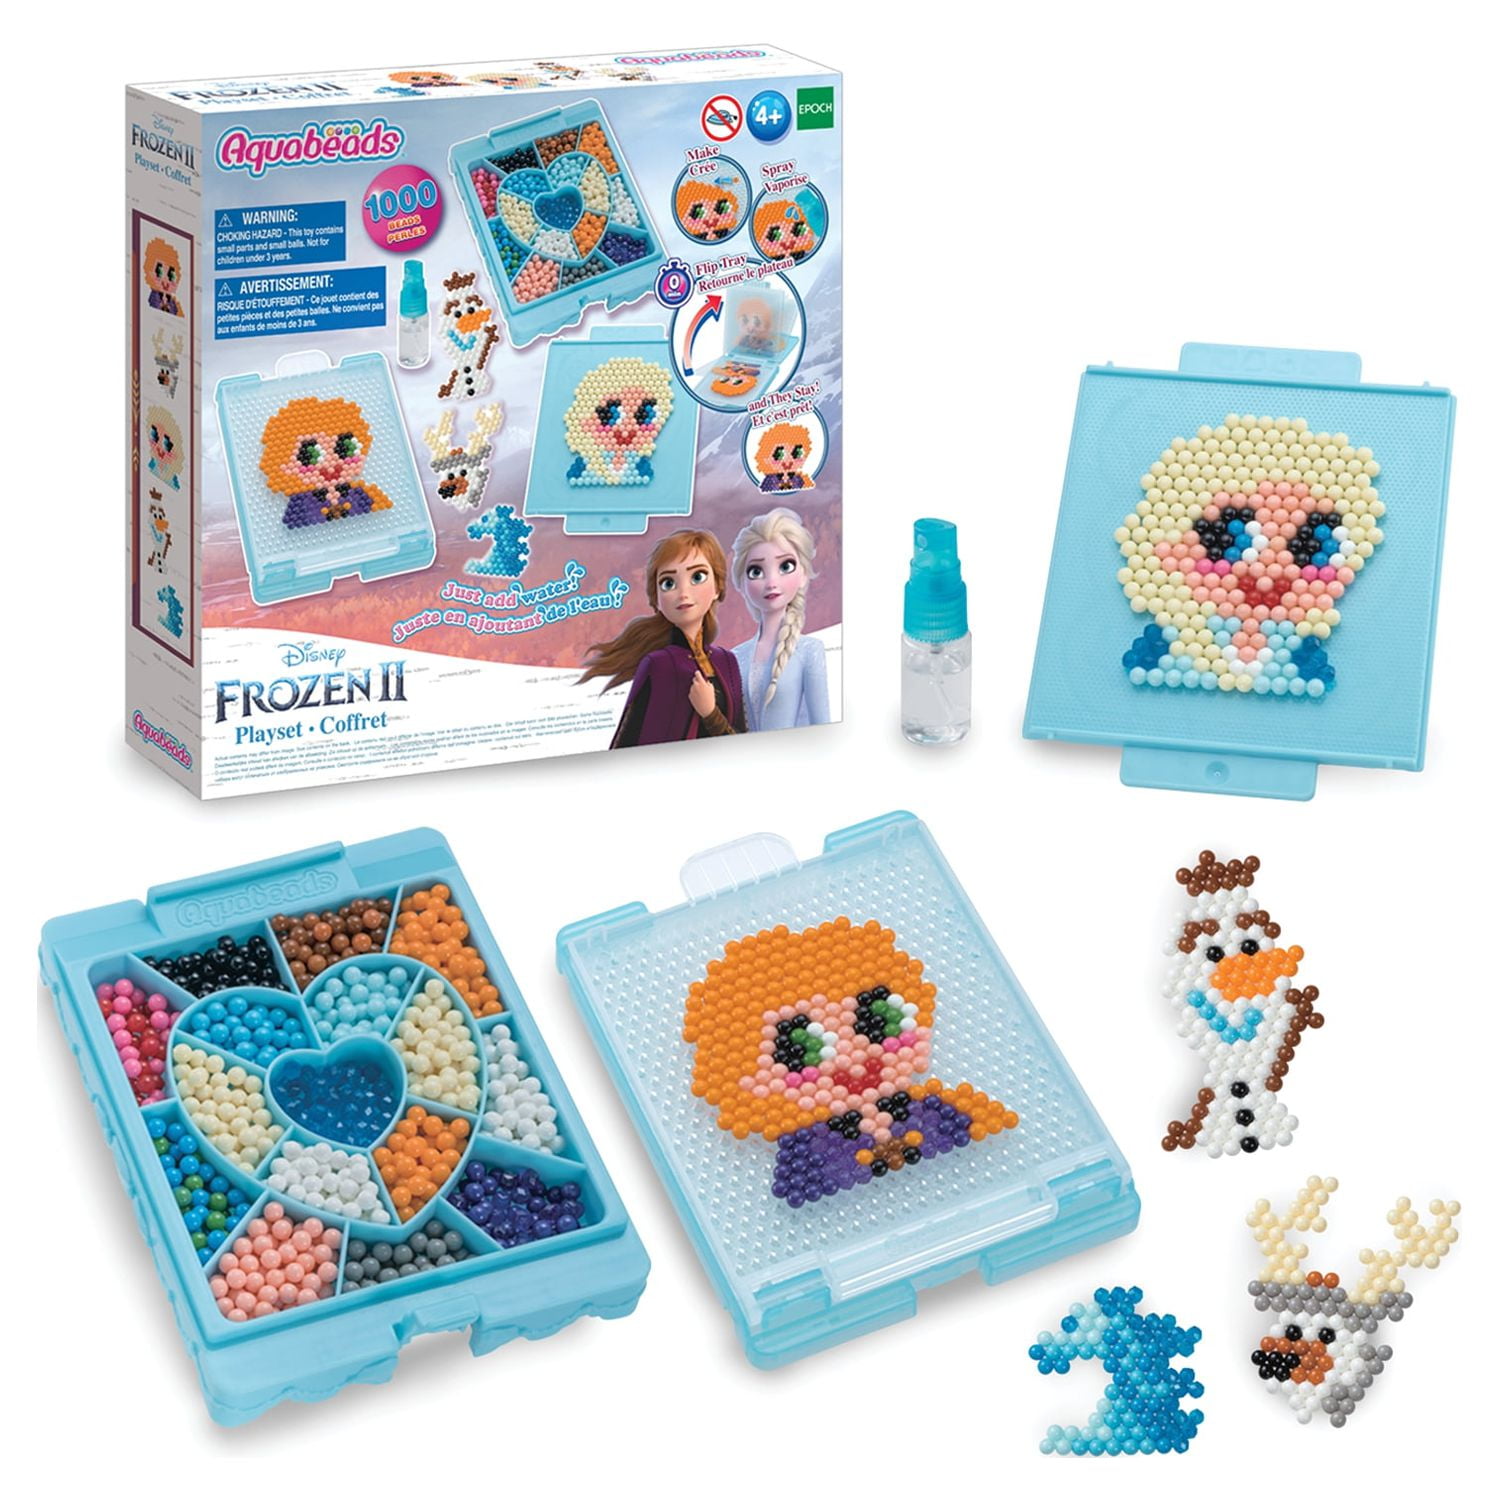 Aquabeads Deluxe Craft Backpack, Complete Arts & Crafts Bead Kit for  Children - Over 1,000 Beads